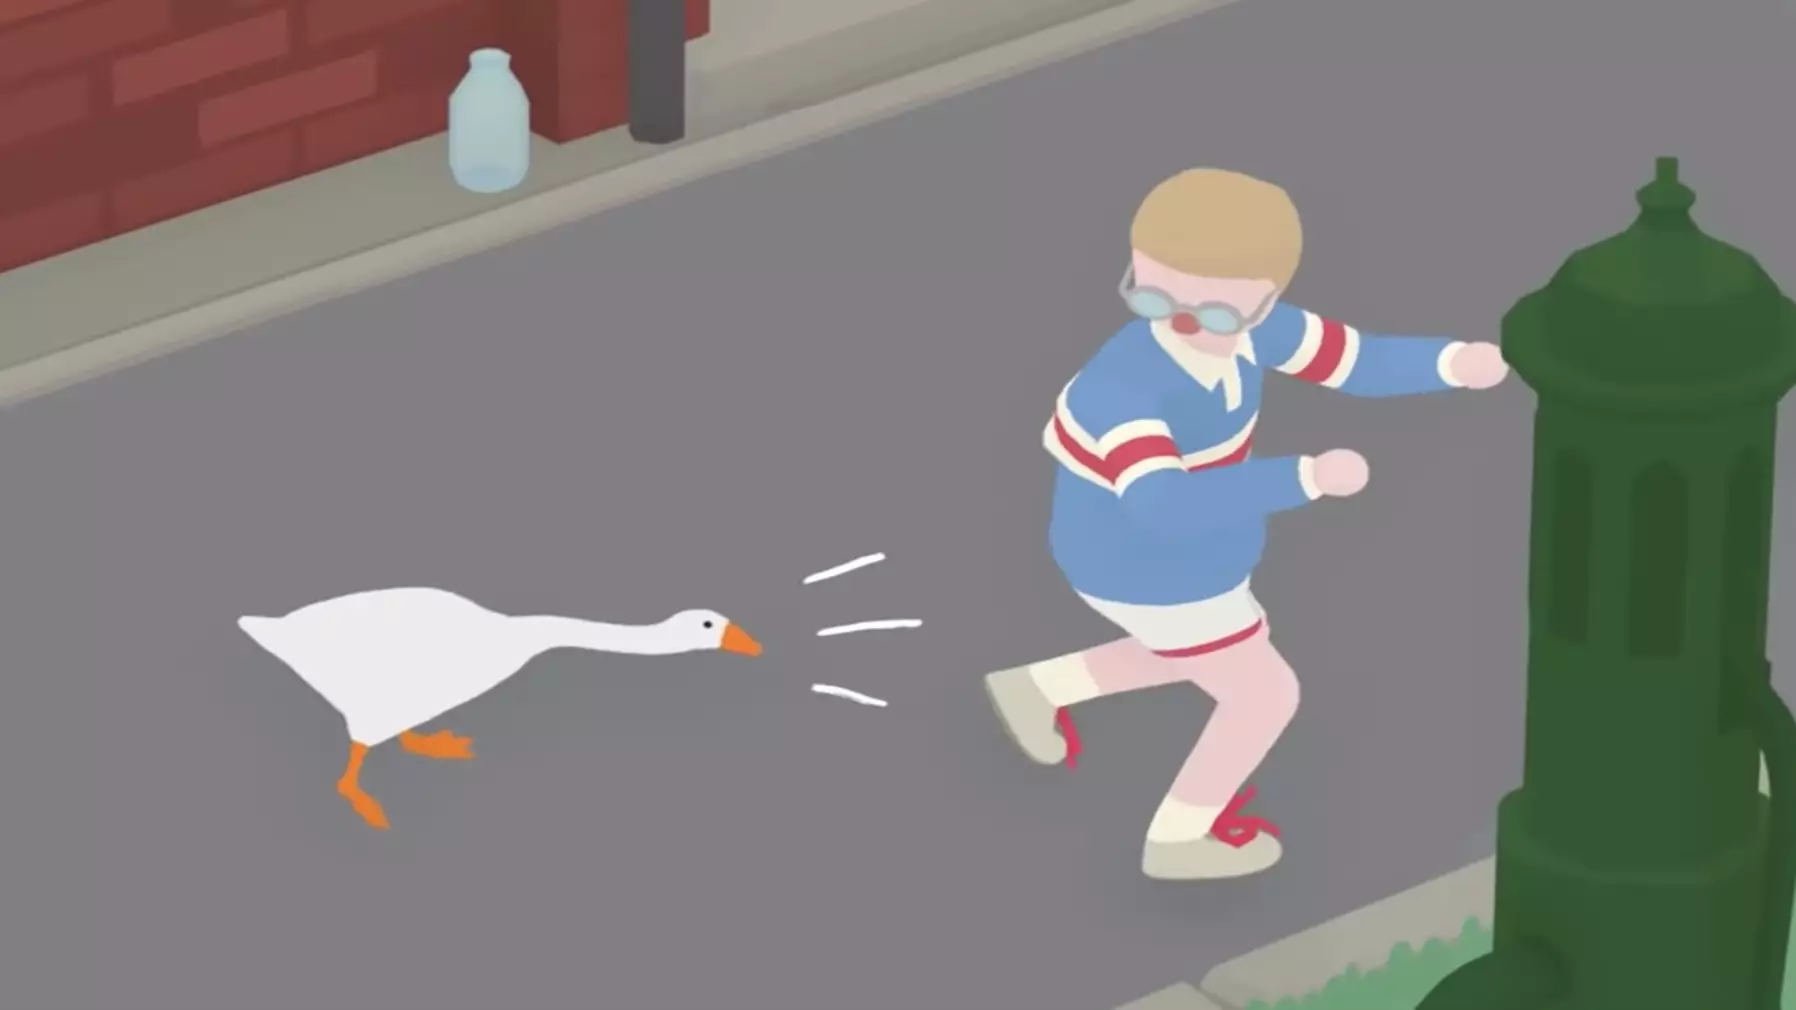 Video Game Where You Play As An Annoying Goose Is Getting Rave Reviews